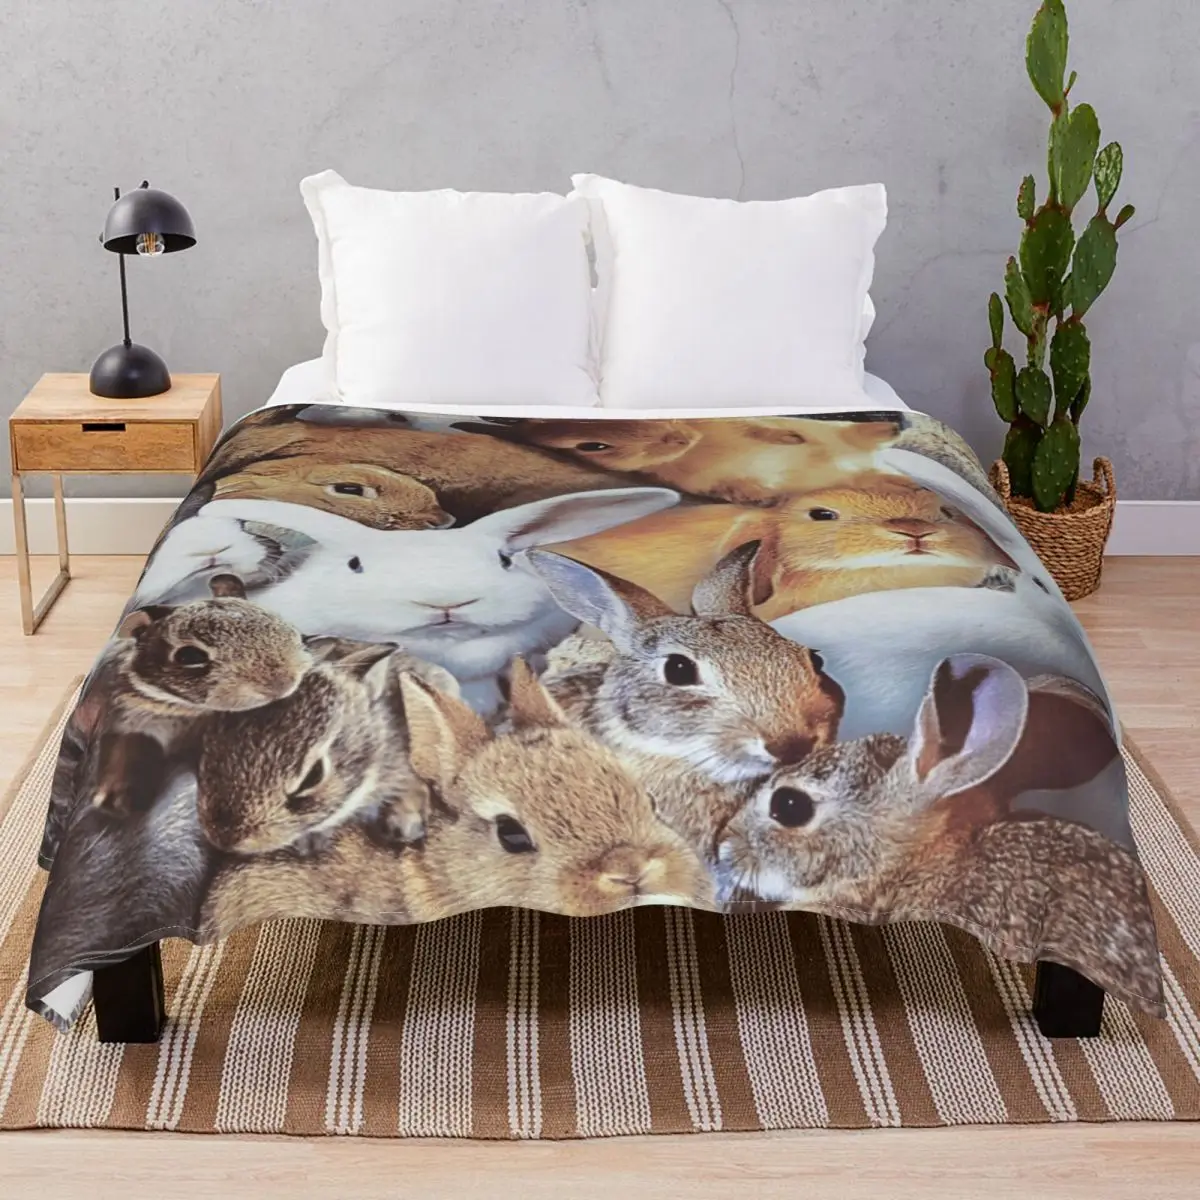 Rabbits Blankets Fleece All Season Soft Throw Blanket for Bed Home Couch Travel Office